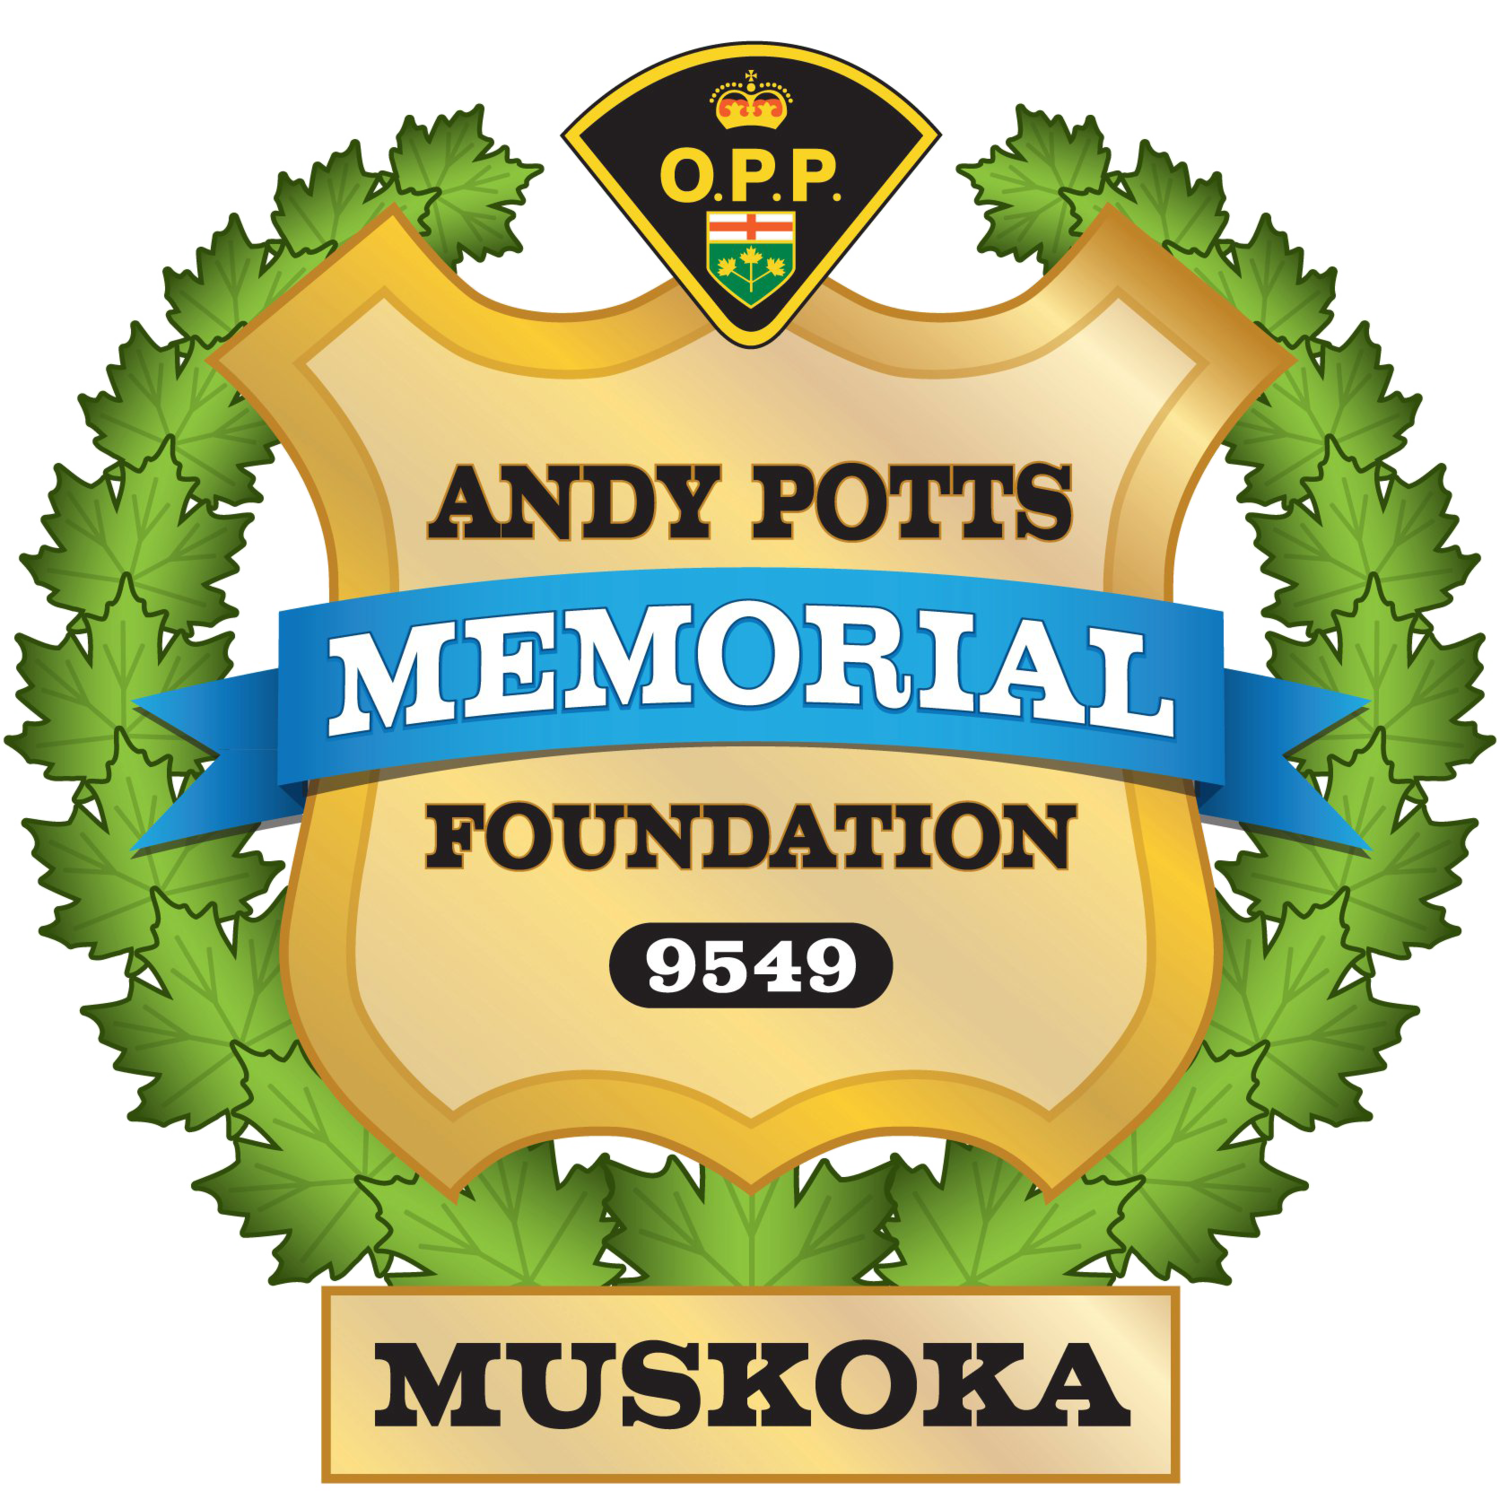 Andy Potts Memorial Foundation 